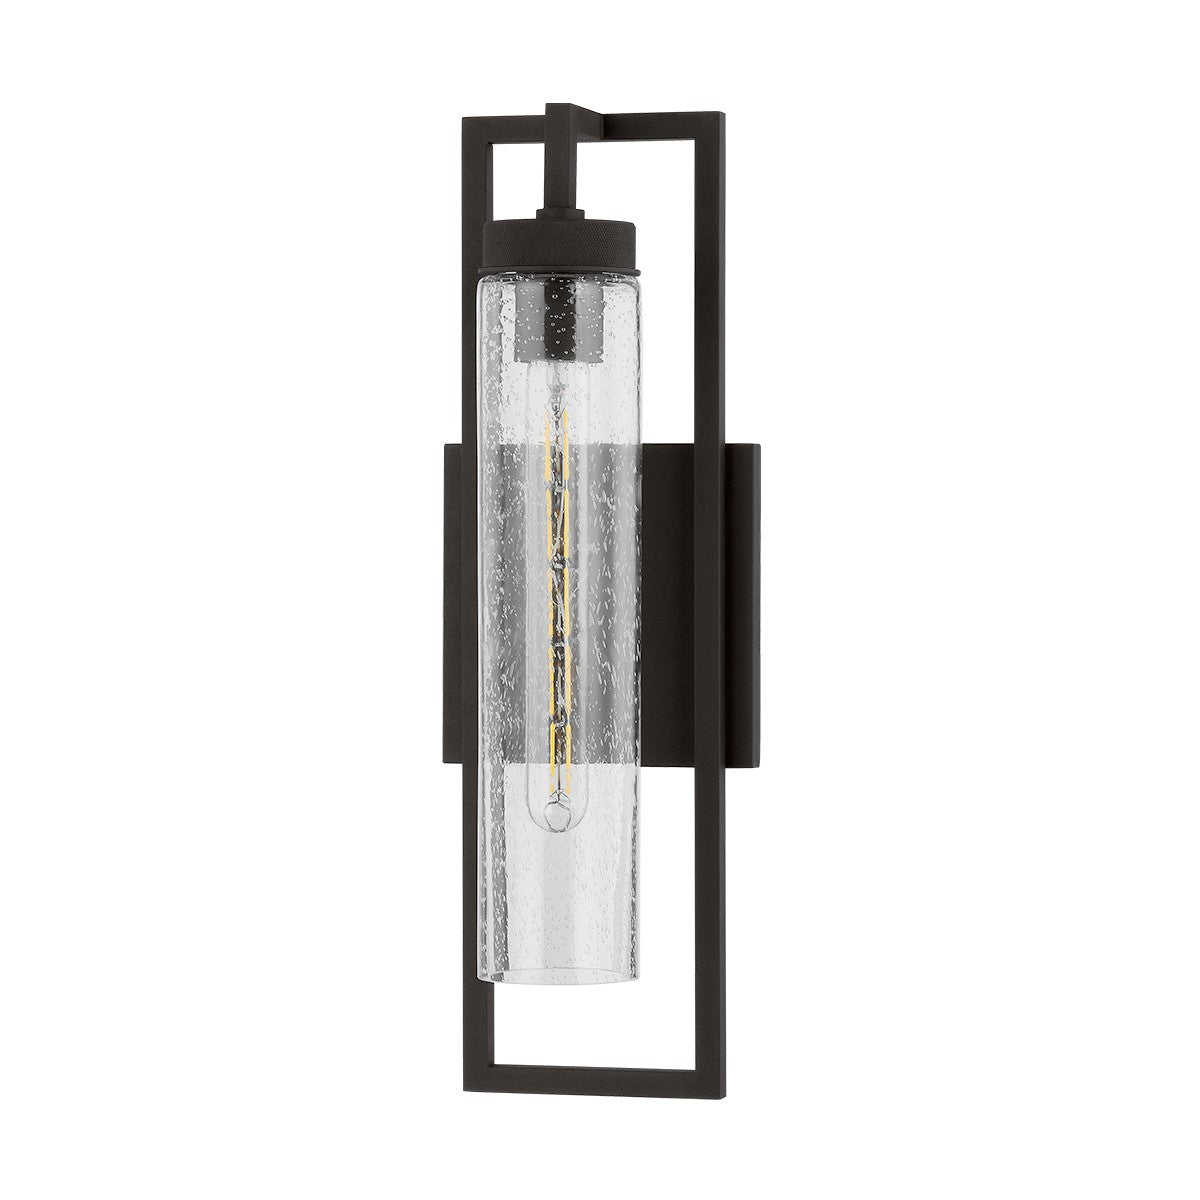 Troy Lighting - B2818-TBK - One Light Exterior Wall Sconce - Chester - Textured Black